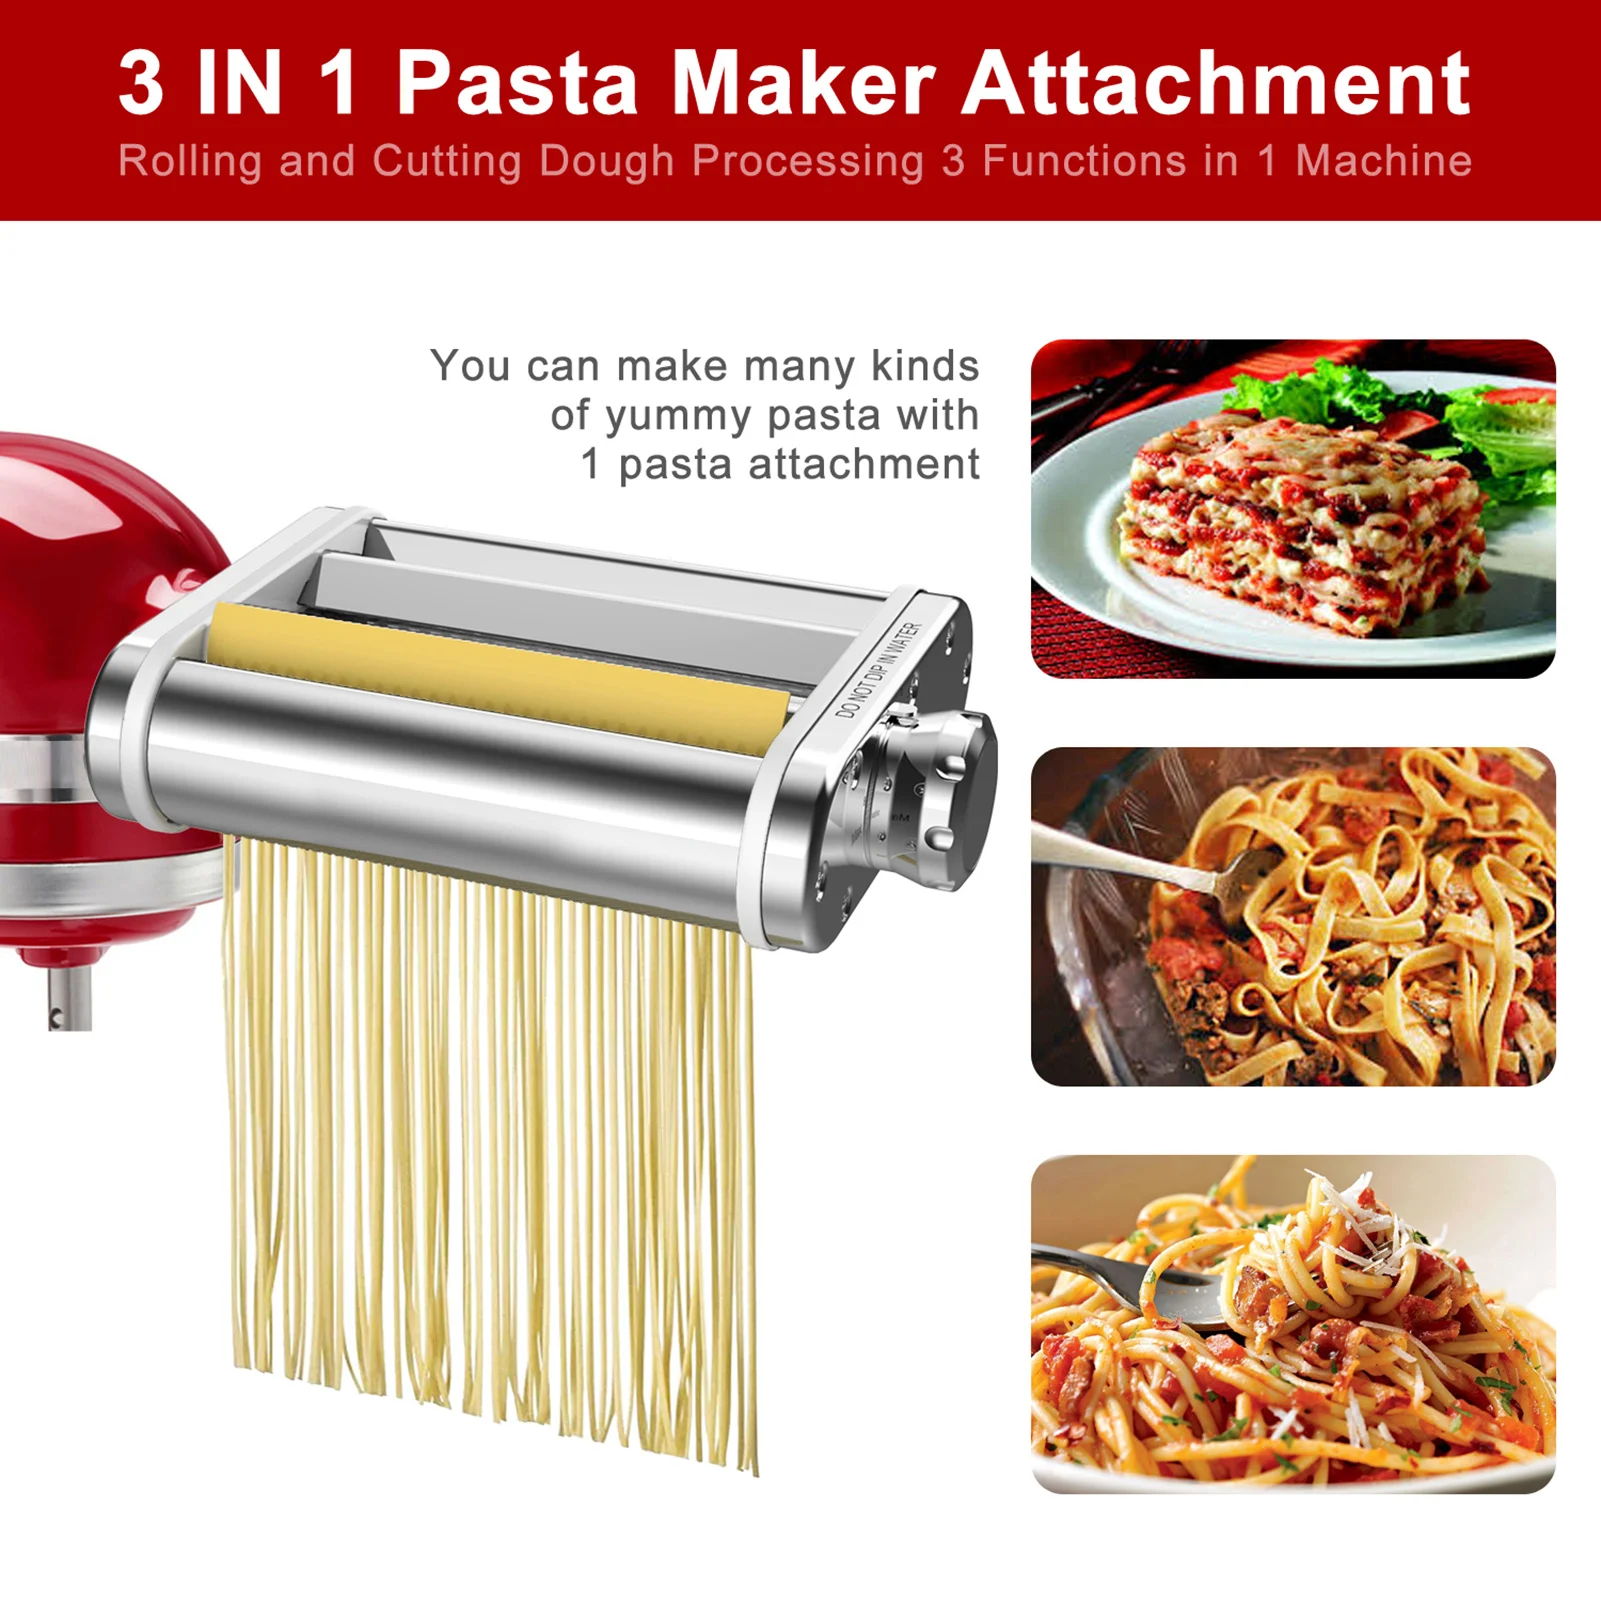 https://ae01.alicdn.com/kf/He13b99712d394828b1712eb3655fcc1cC/3-in-1-Pasta-Maker-Attachments-Set-Stainless-Steel-Spaghetti-Noodle-Dough-Making-Tools-Roller-Presser.jpg